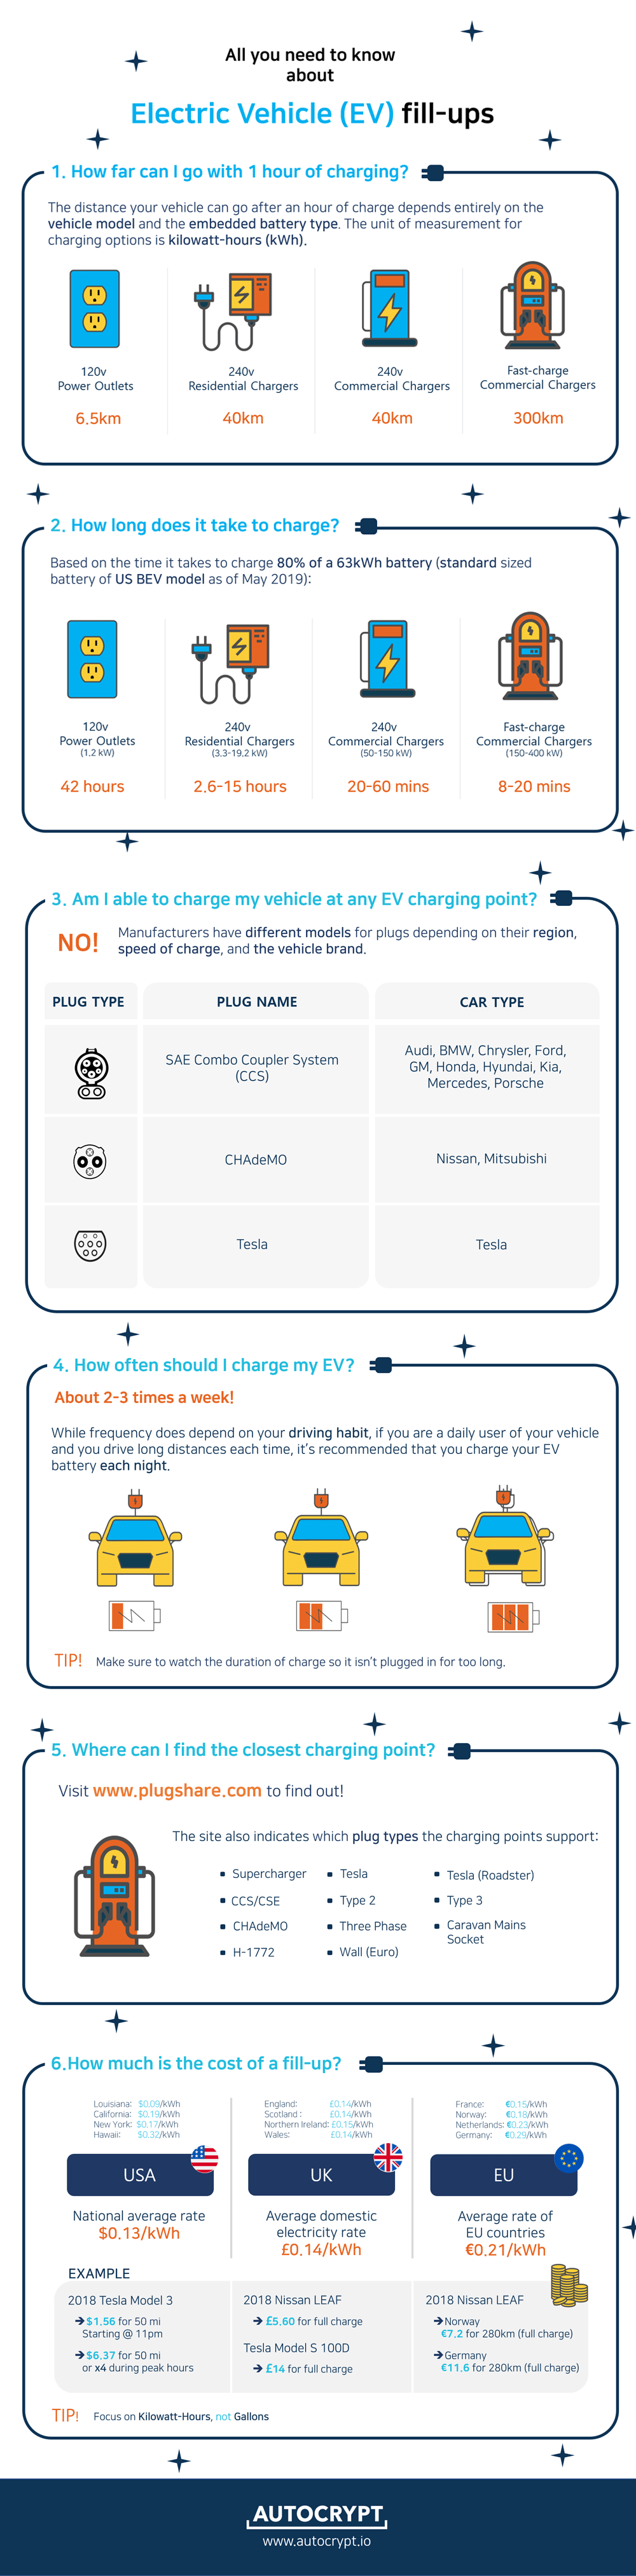 electric vehicle fill-ups infographic